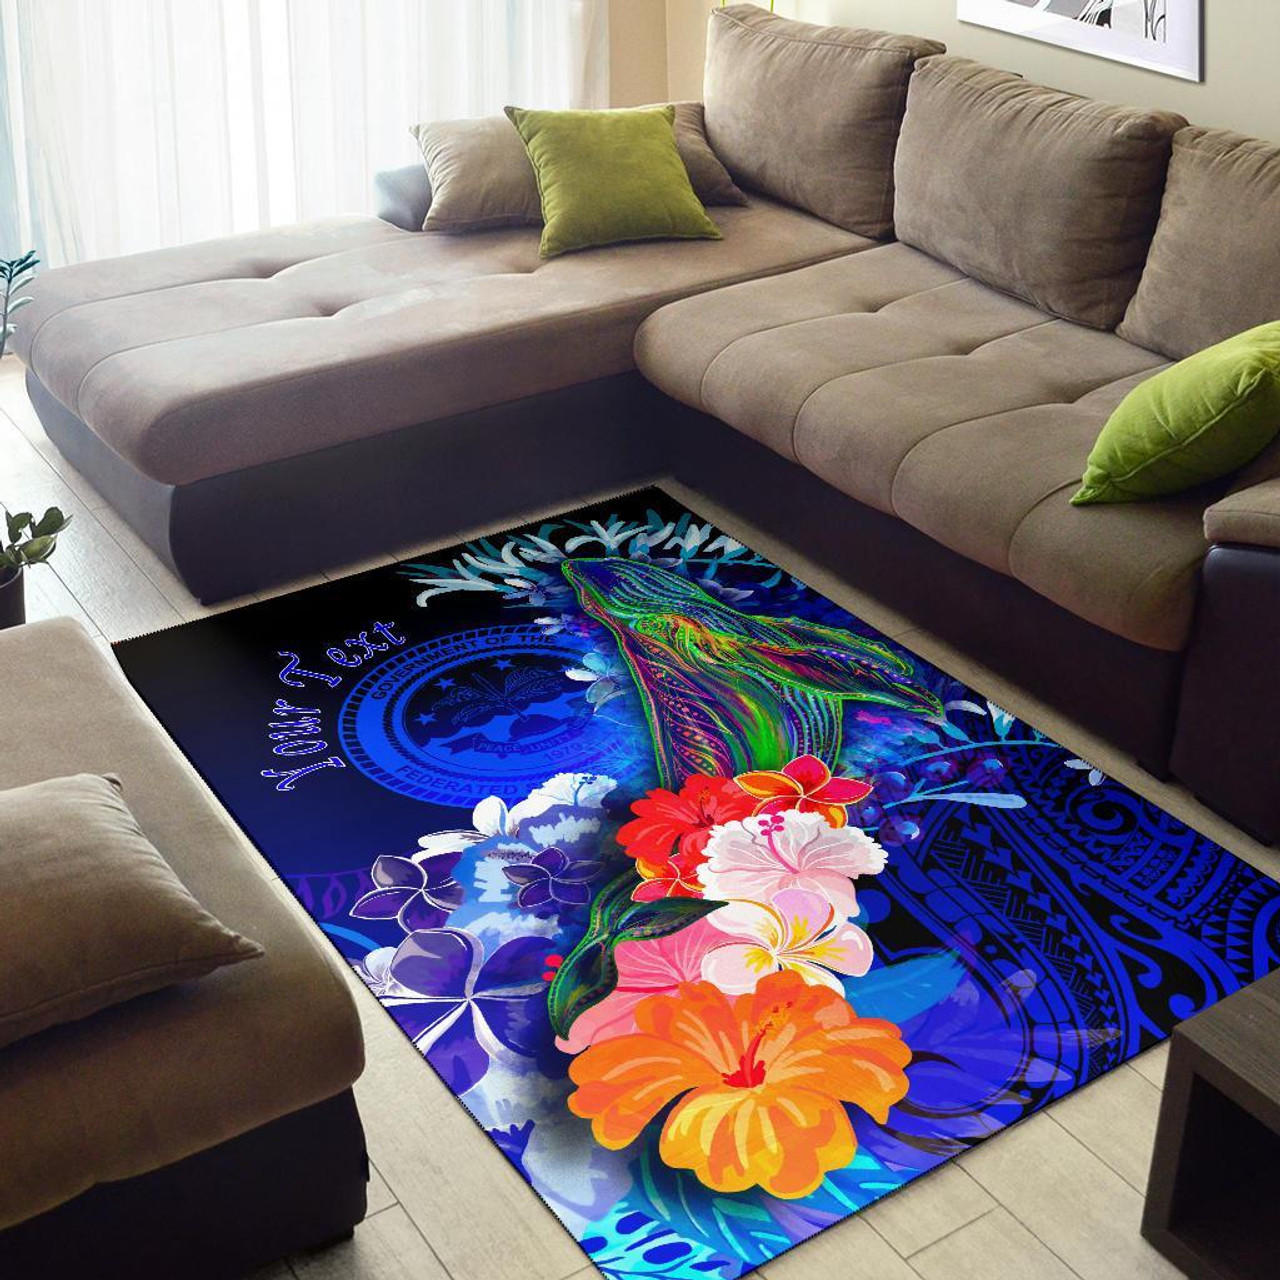 Federated States of Micronesia Custom Personalised Area Rug - Humpback Whale with Tropical Flowers (Blue) Polynesian 2